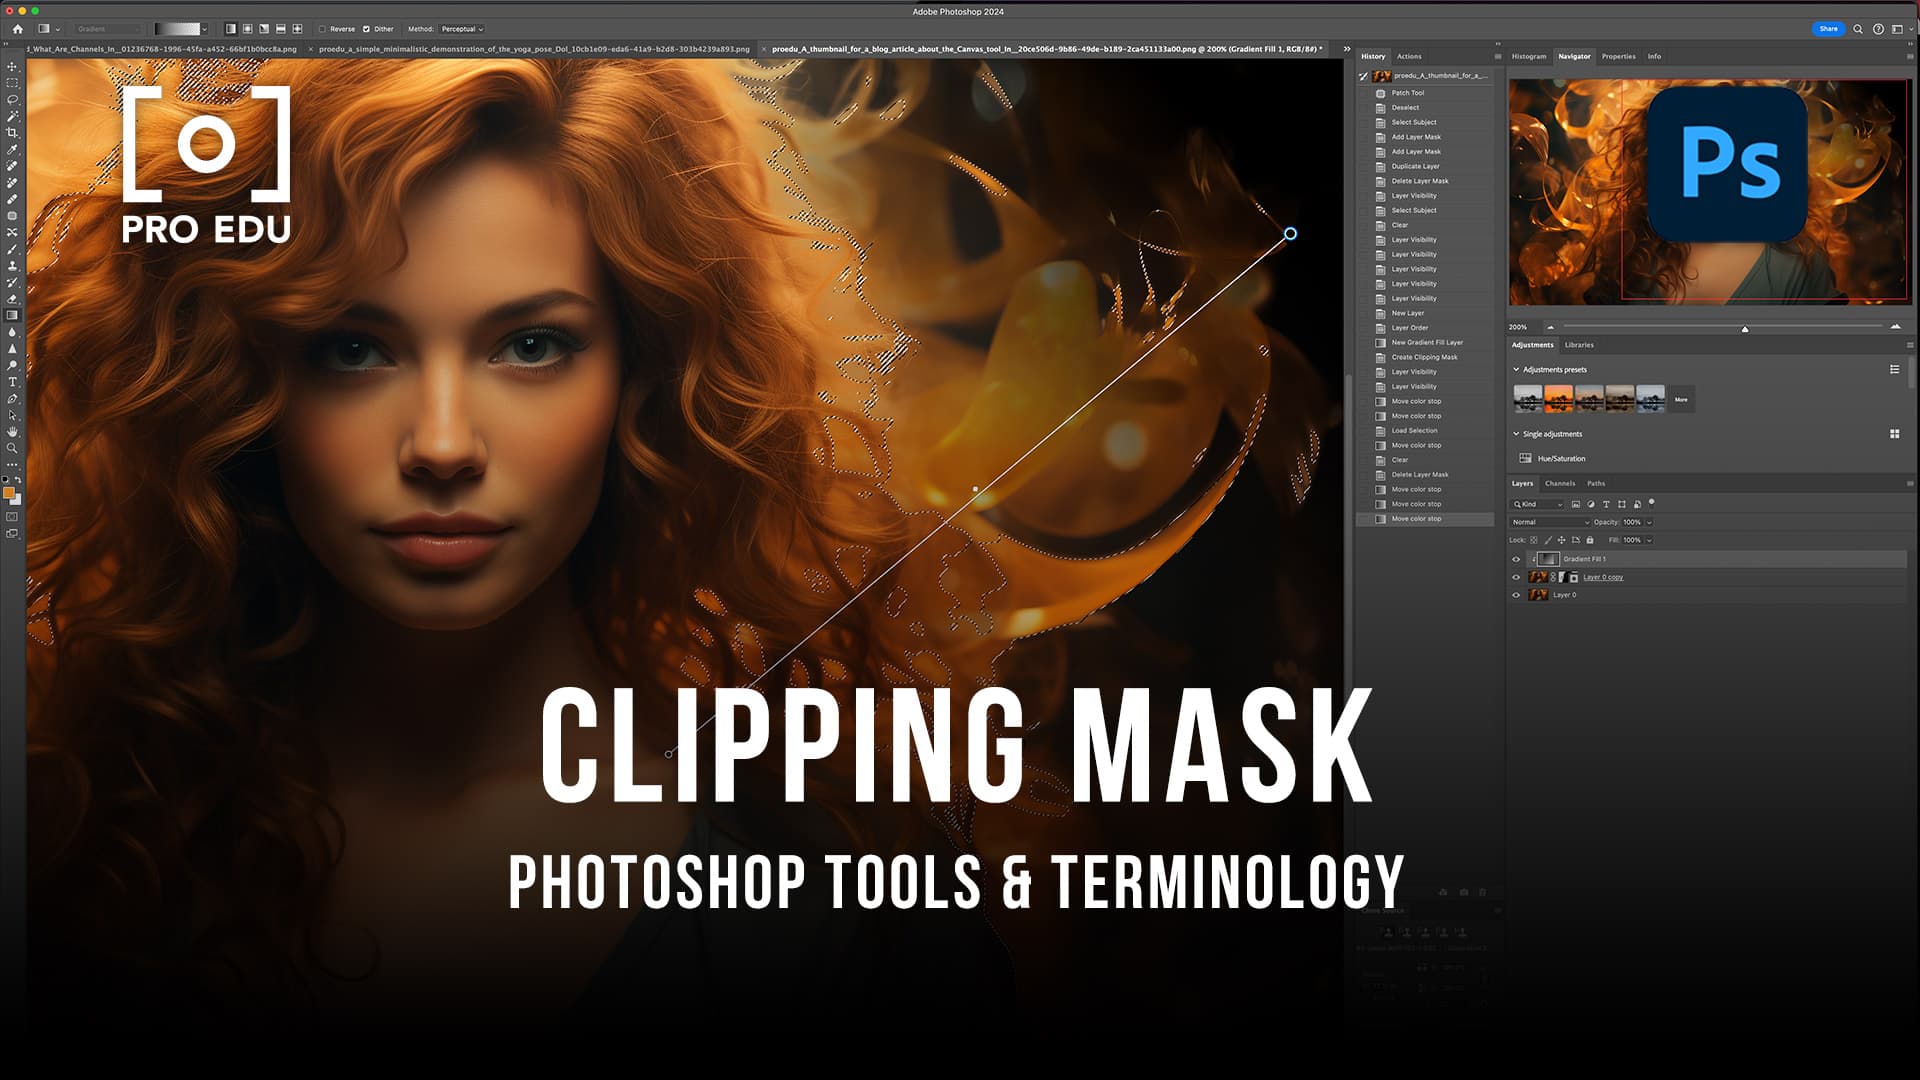 How To Effectively Use Clipping Masks in Photoshop